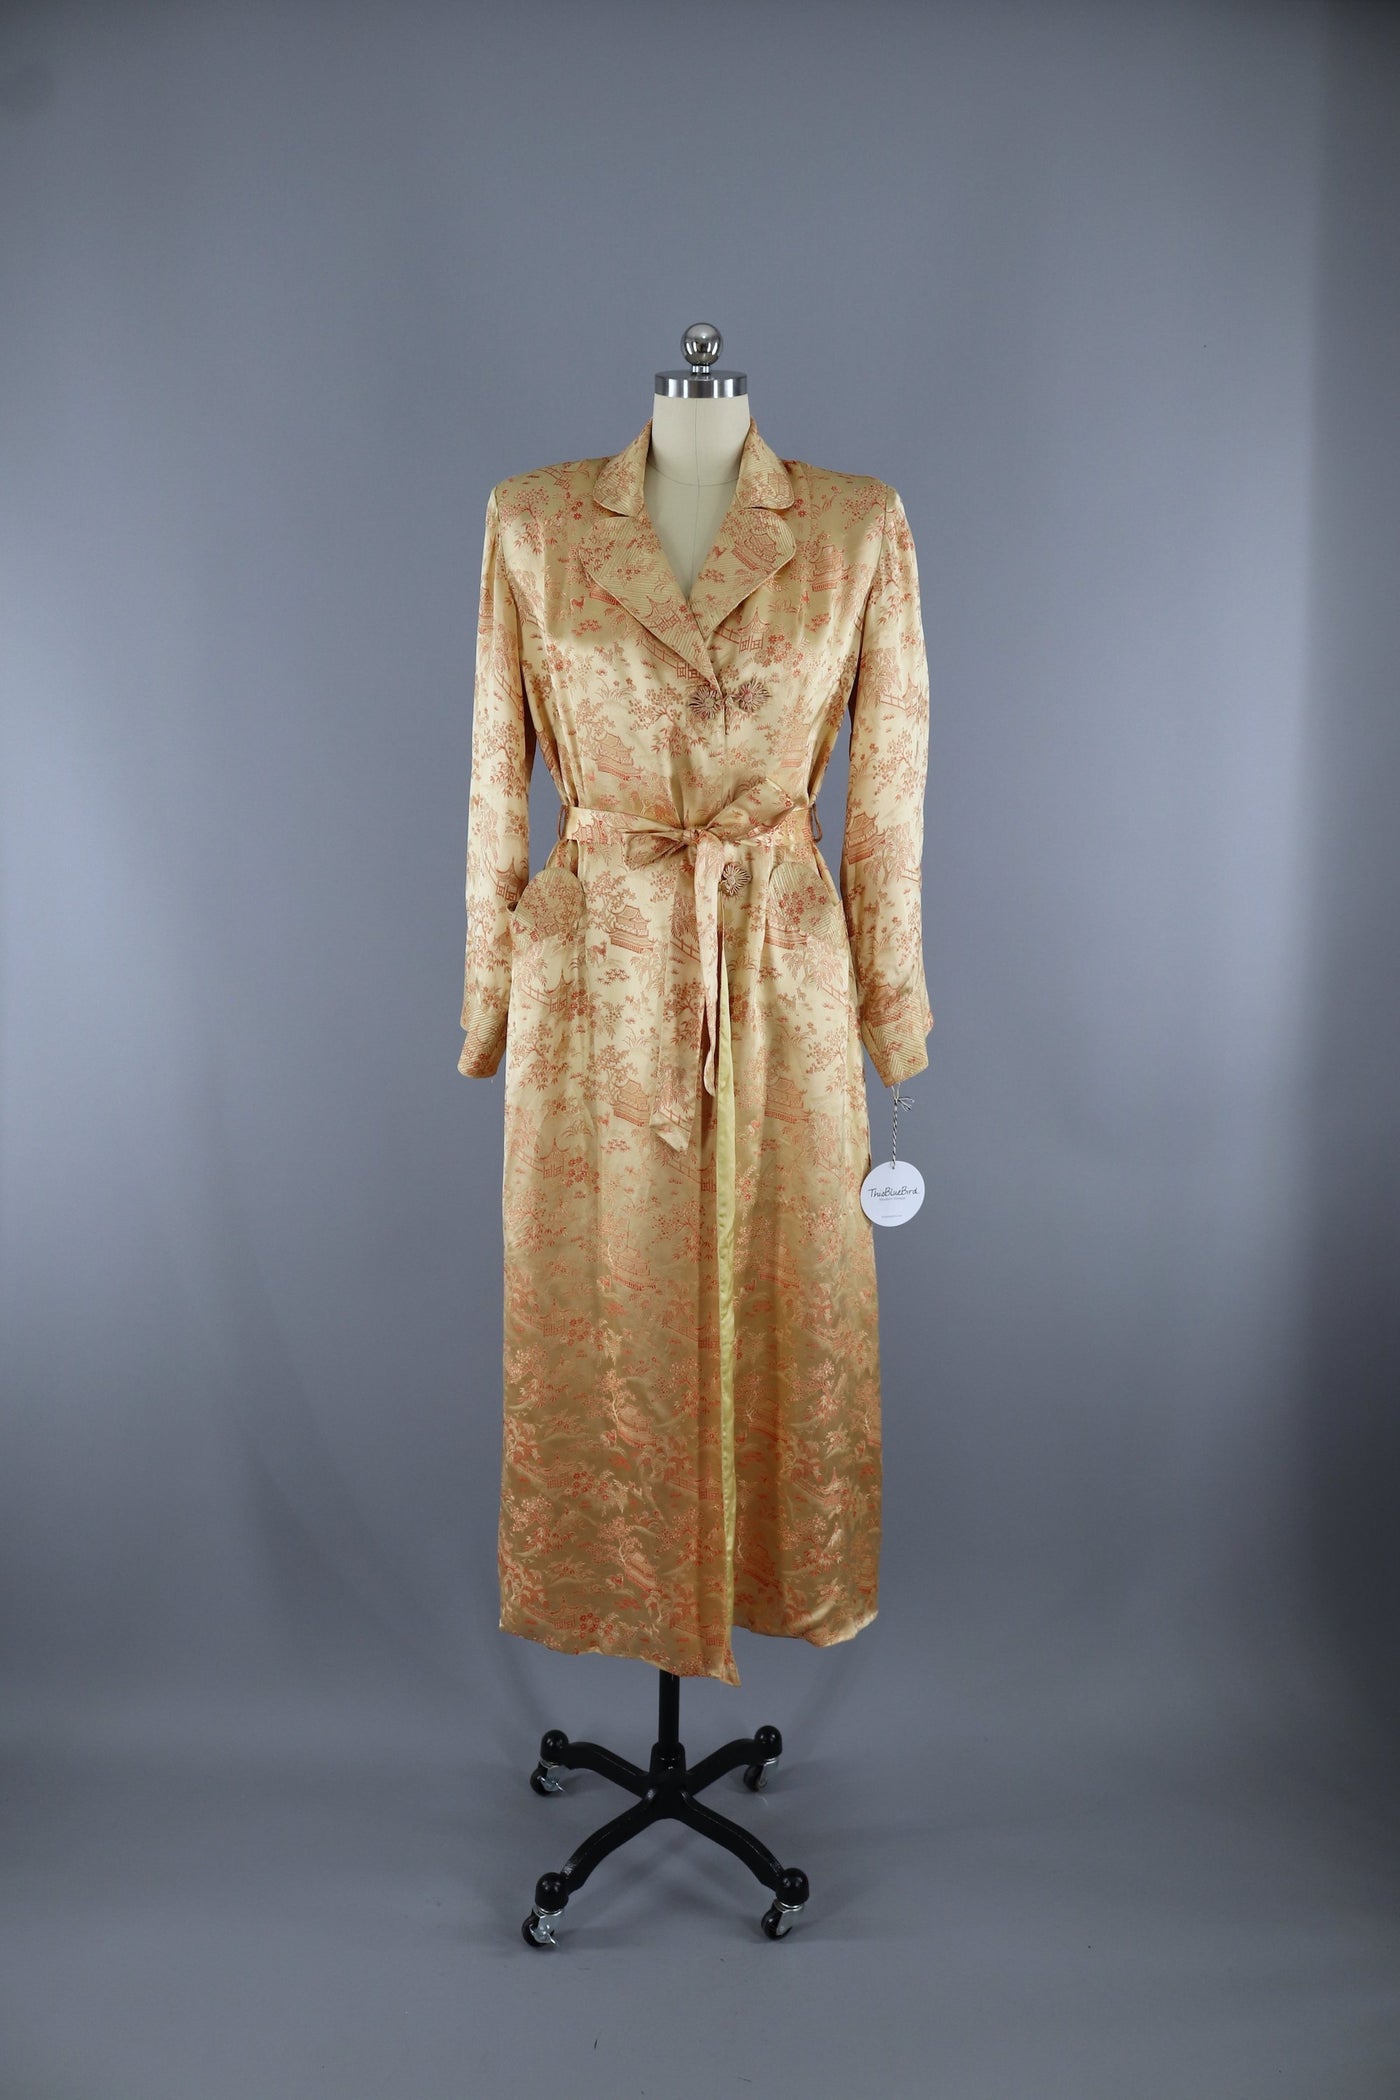 Vintage 1950s Vintage Gold Satin Robe / Chinoiserie Dressing Gown - ThisBlueBird